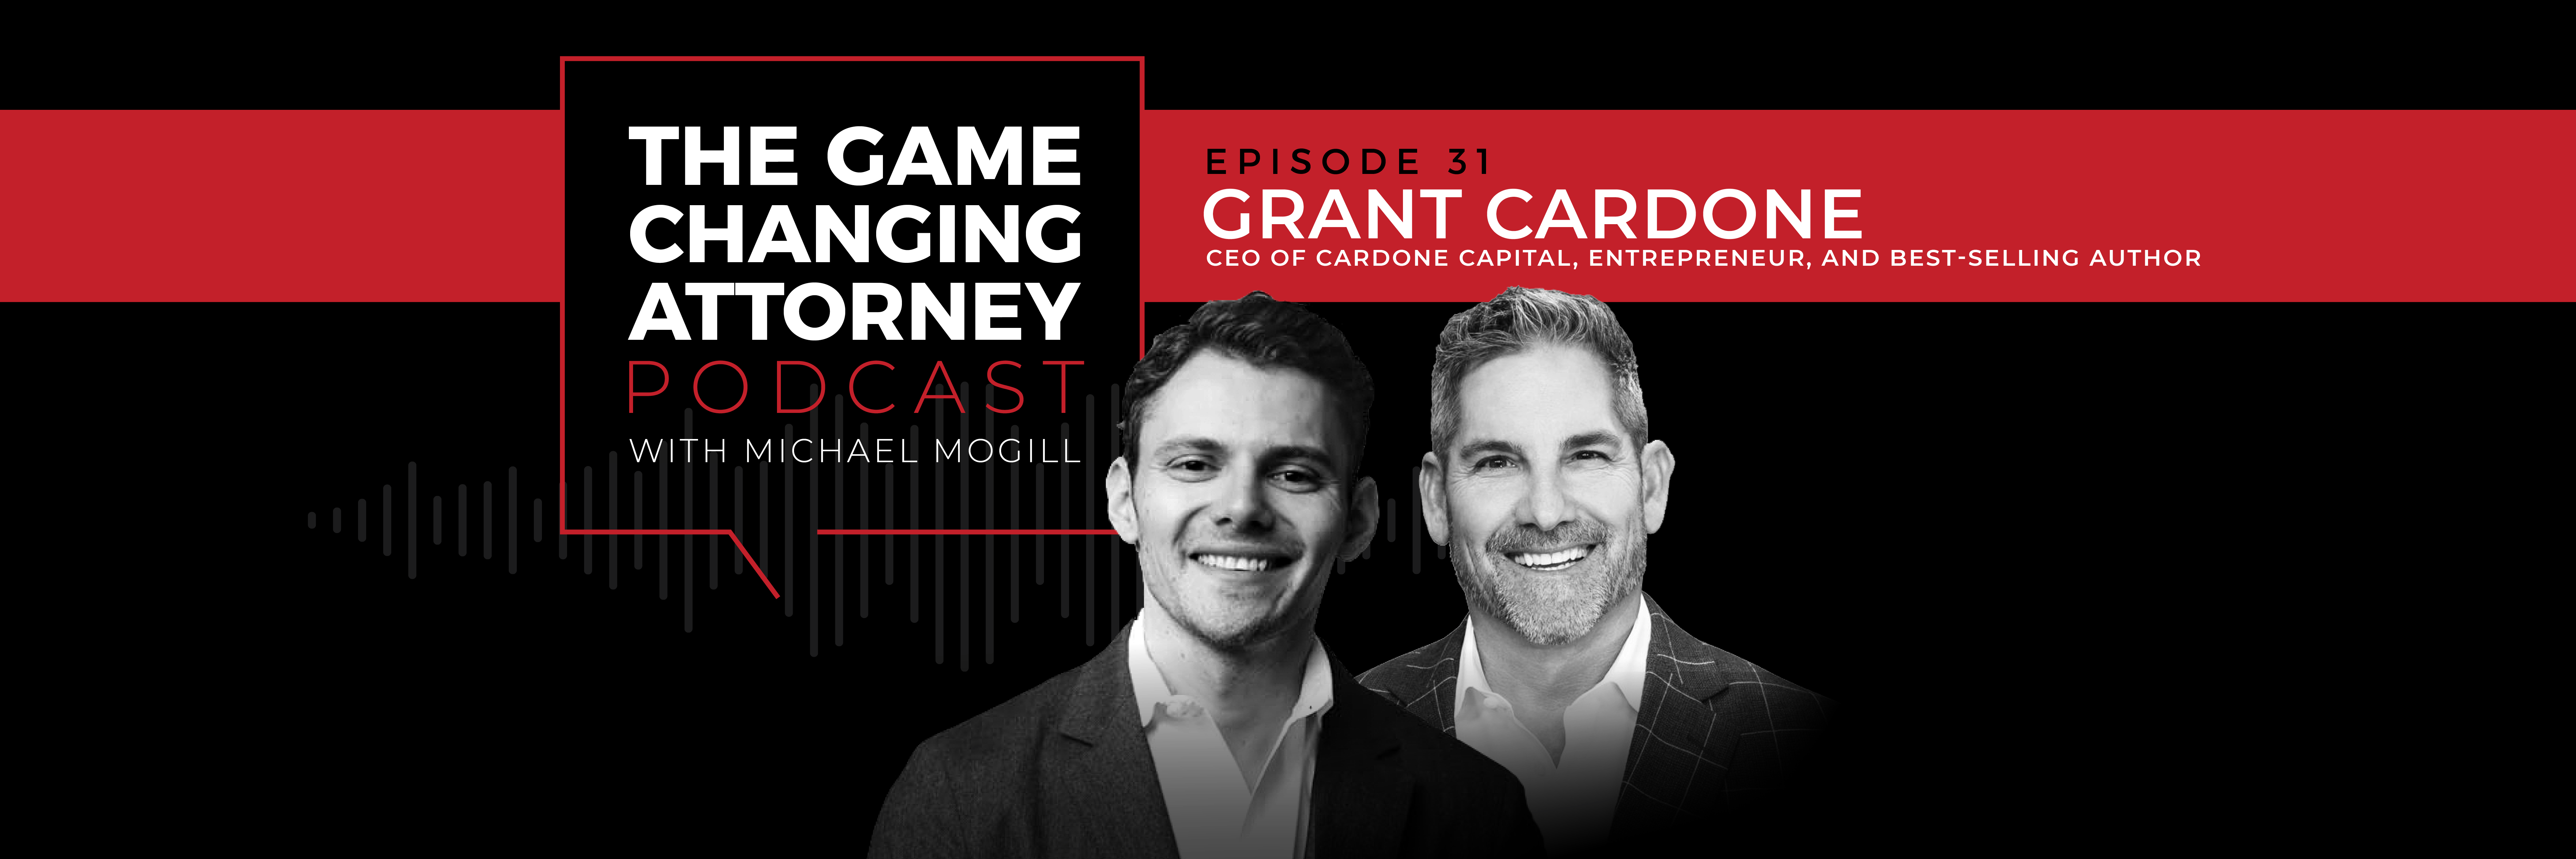 Grant Cardone - The Game Changing Attorney Podcast - Desktop